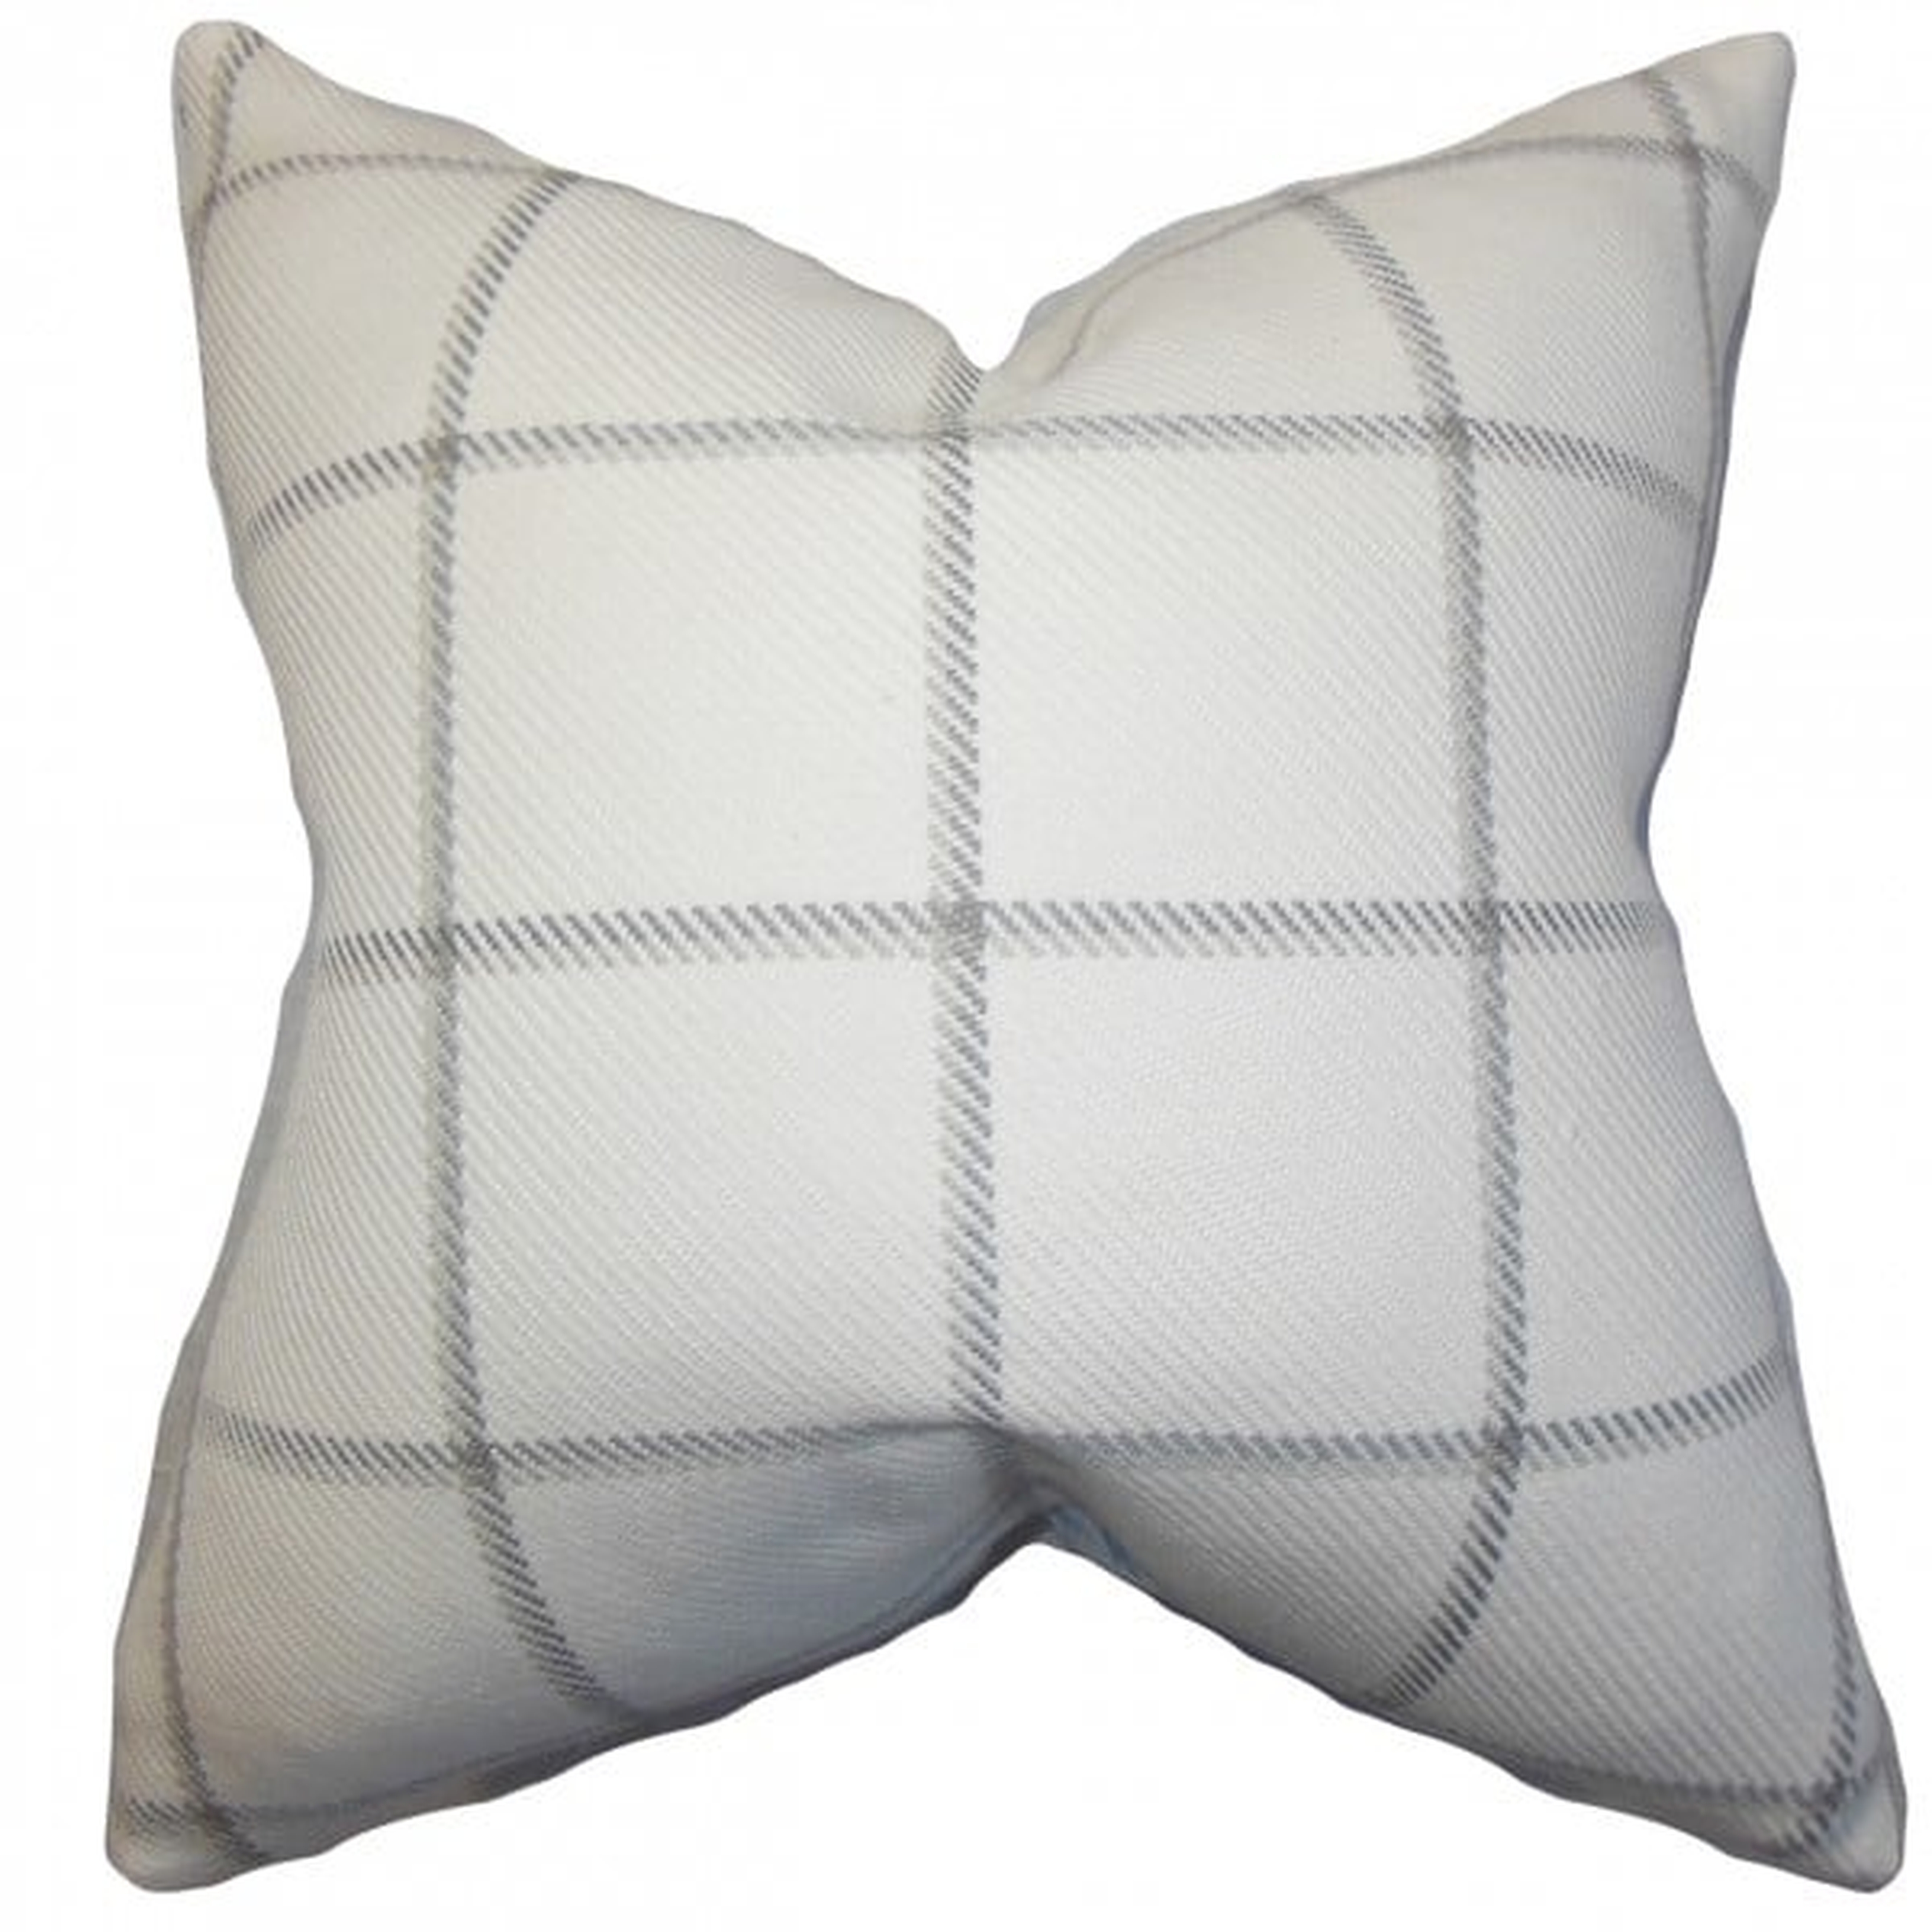 Wilmie Plaid Pillow Gray White - 22" w/ poly insert - Linen & Seam